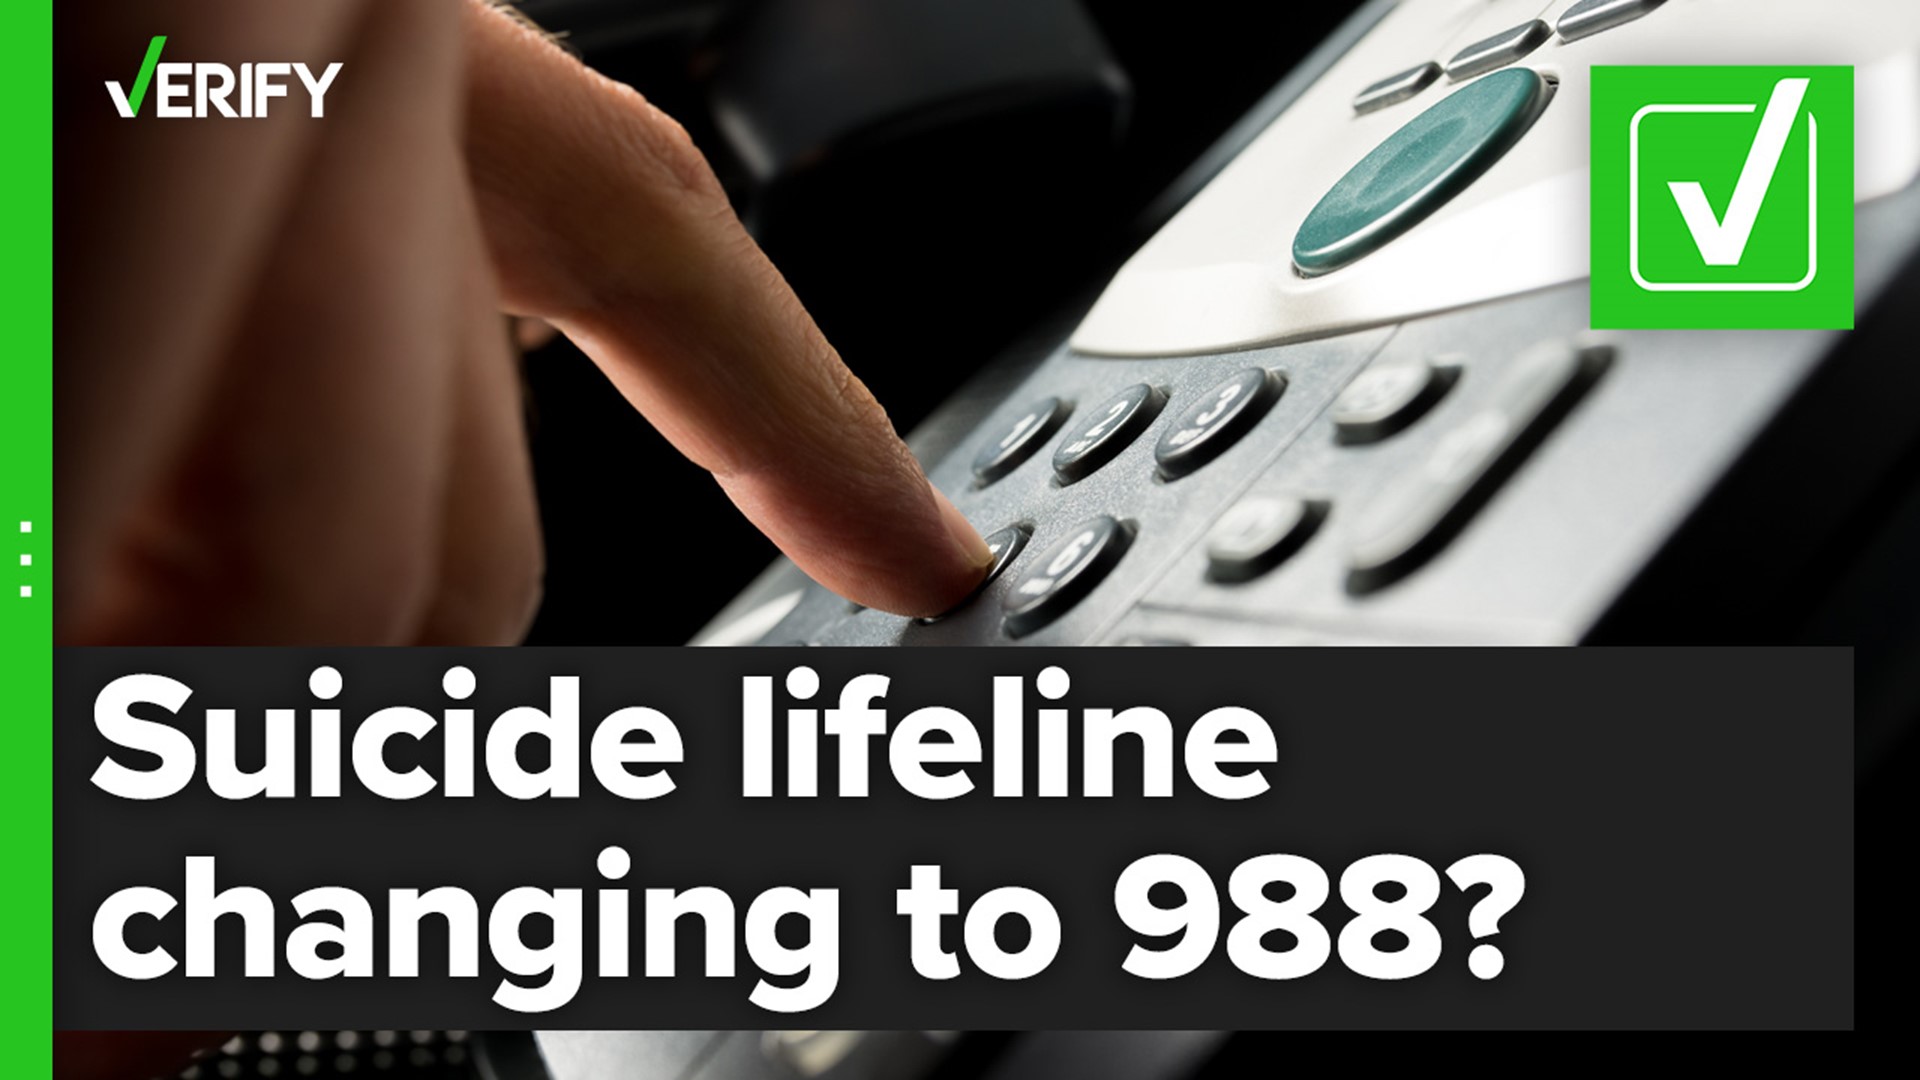 A recent post on Instagram that went viral claimed the National Suicide Prevention Lifeline will switch to 988. That's true, and the change is coming sooner than you